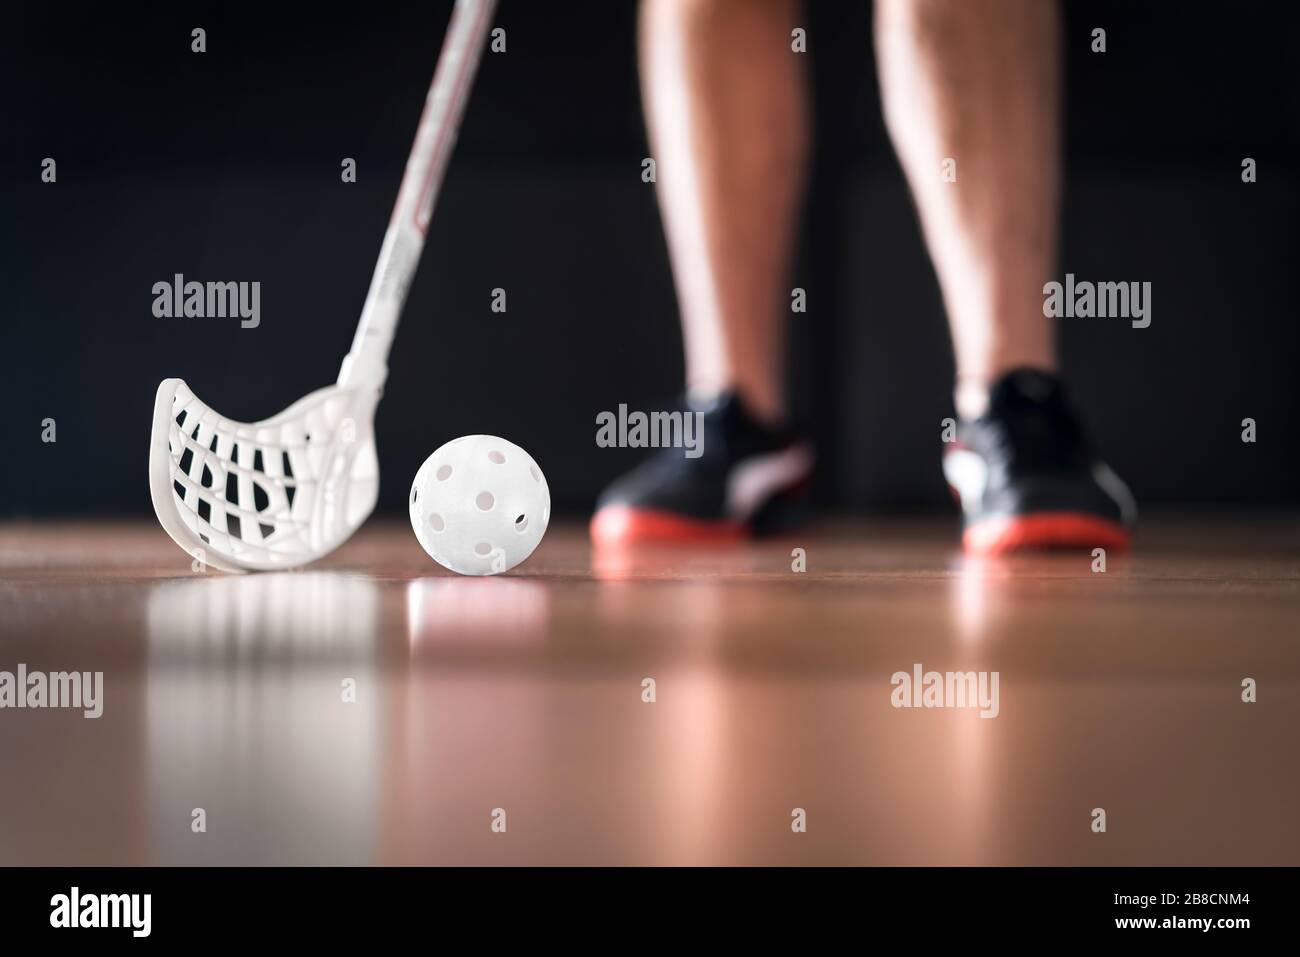 Floorball player standing with white ball and stick. Floor hockey concept. Stock Photo